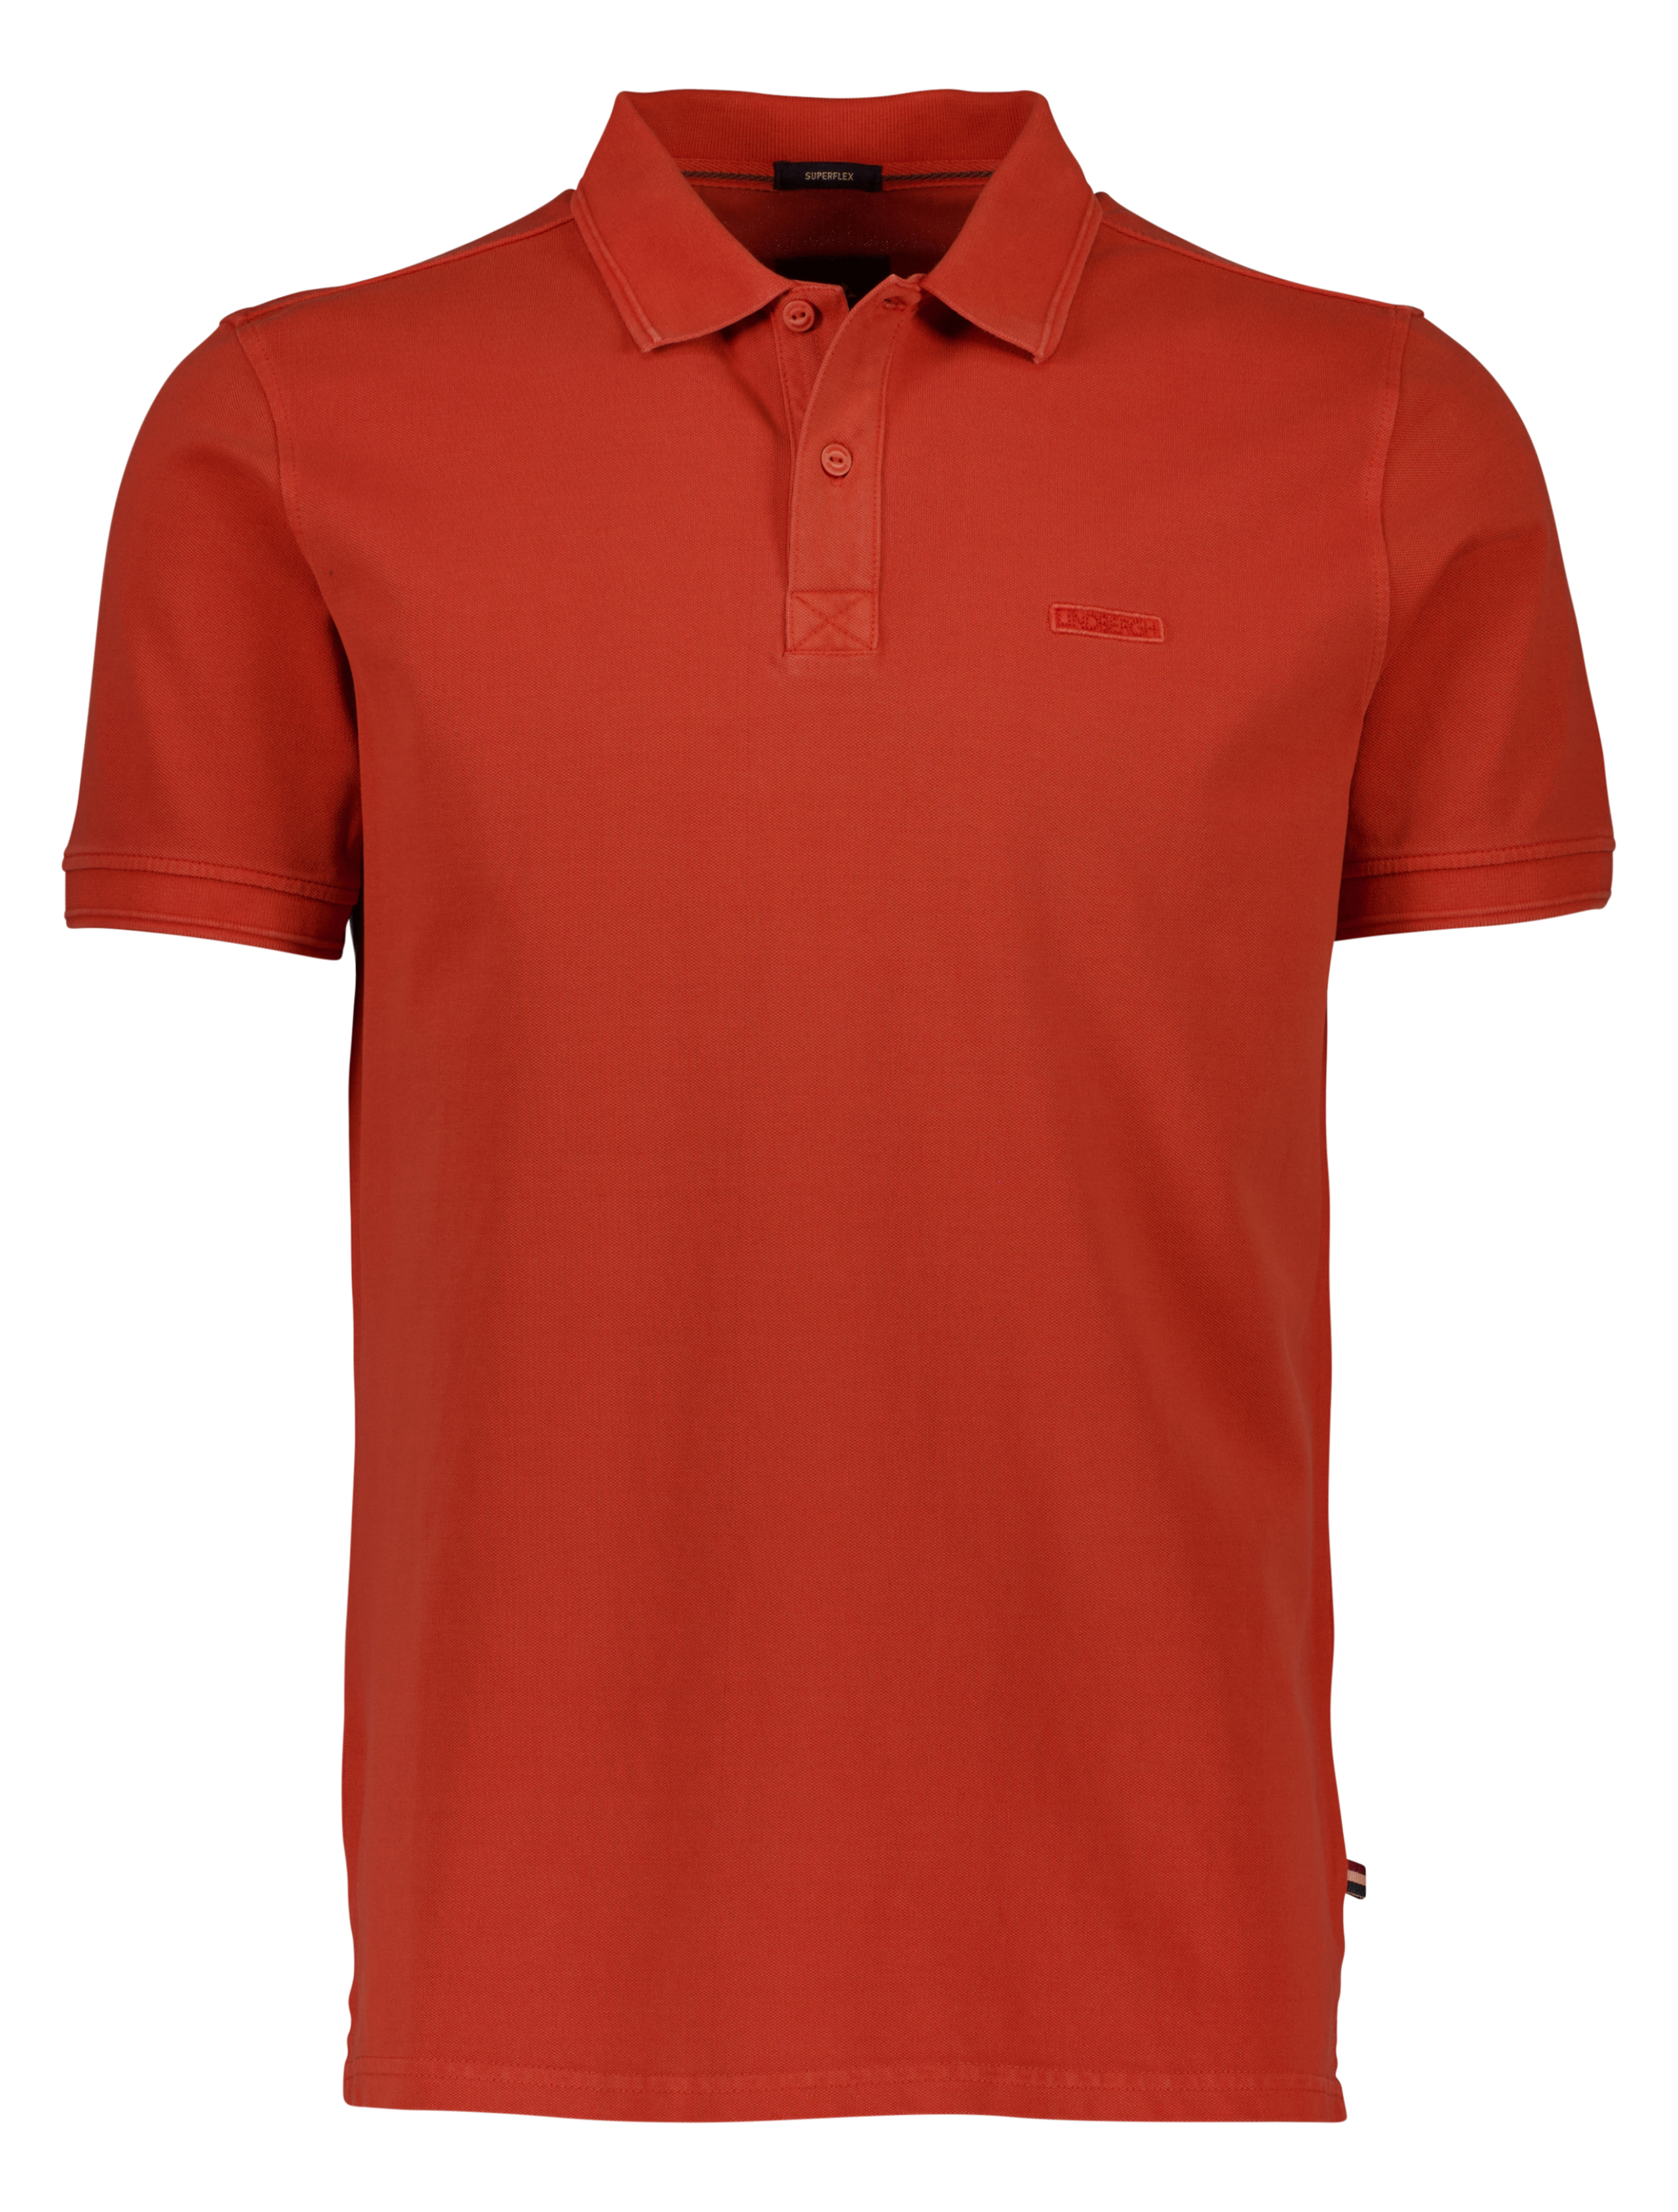 Lindbergh Polo shirt red / faded red